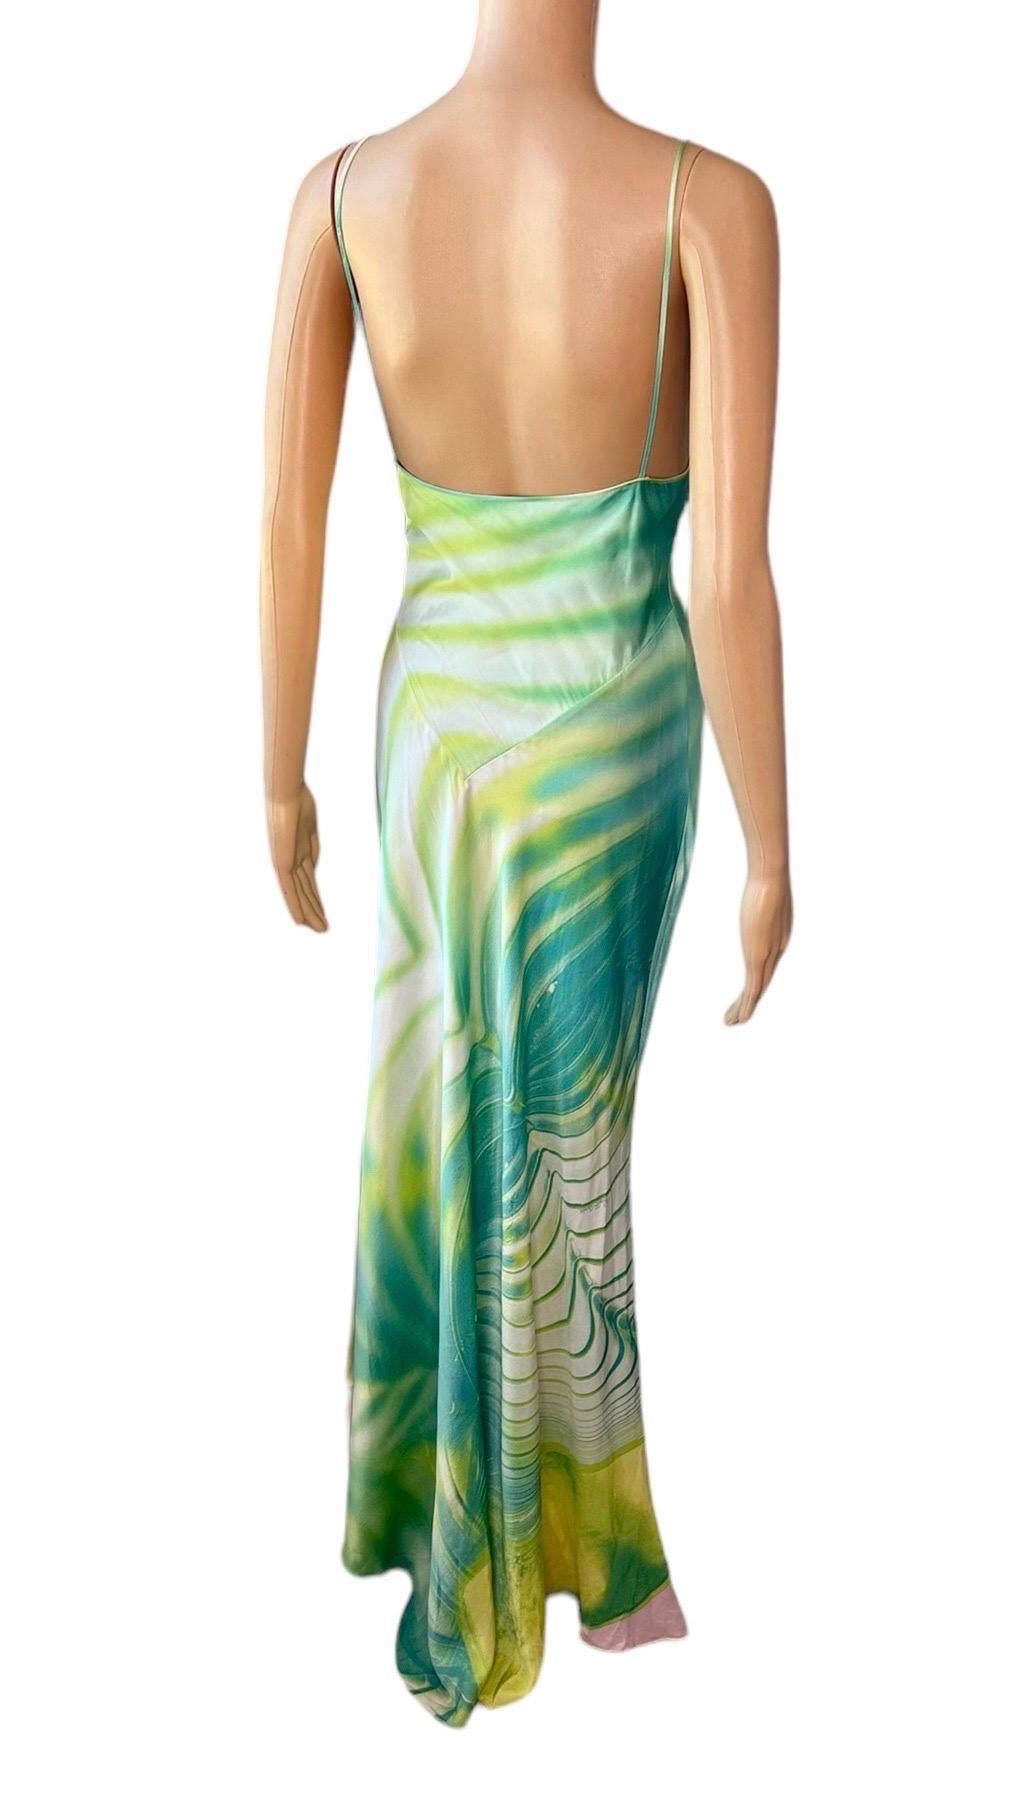 Roberto Cavalli S/S 2001 Psychedelic Print Silk Slip Maxi Evening Dress Gown For Sale 3